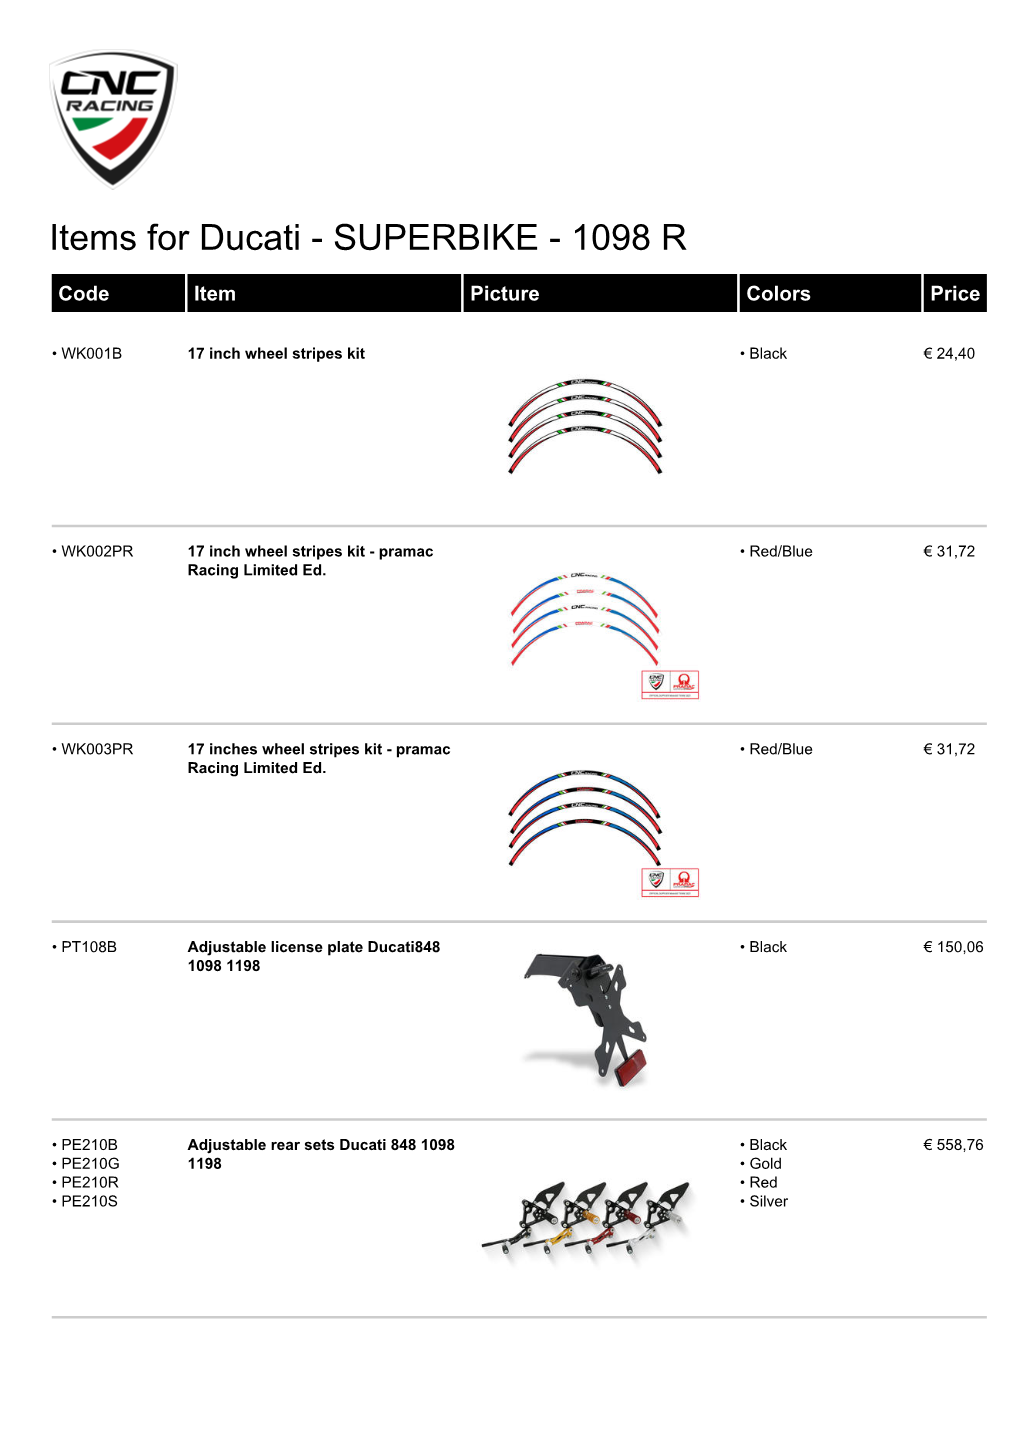 Items for Ducati - SUPERBIKE - 1098 R